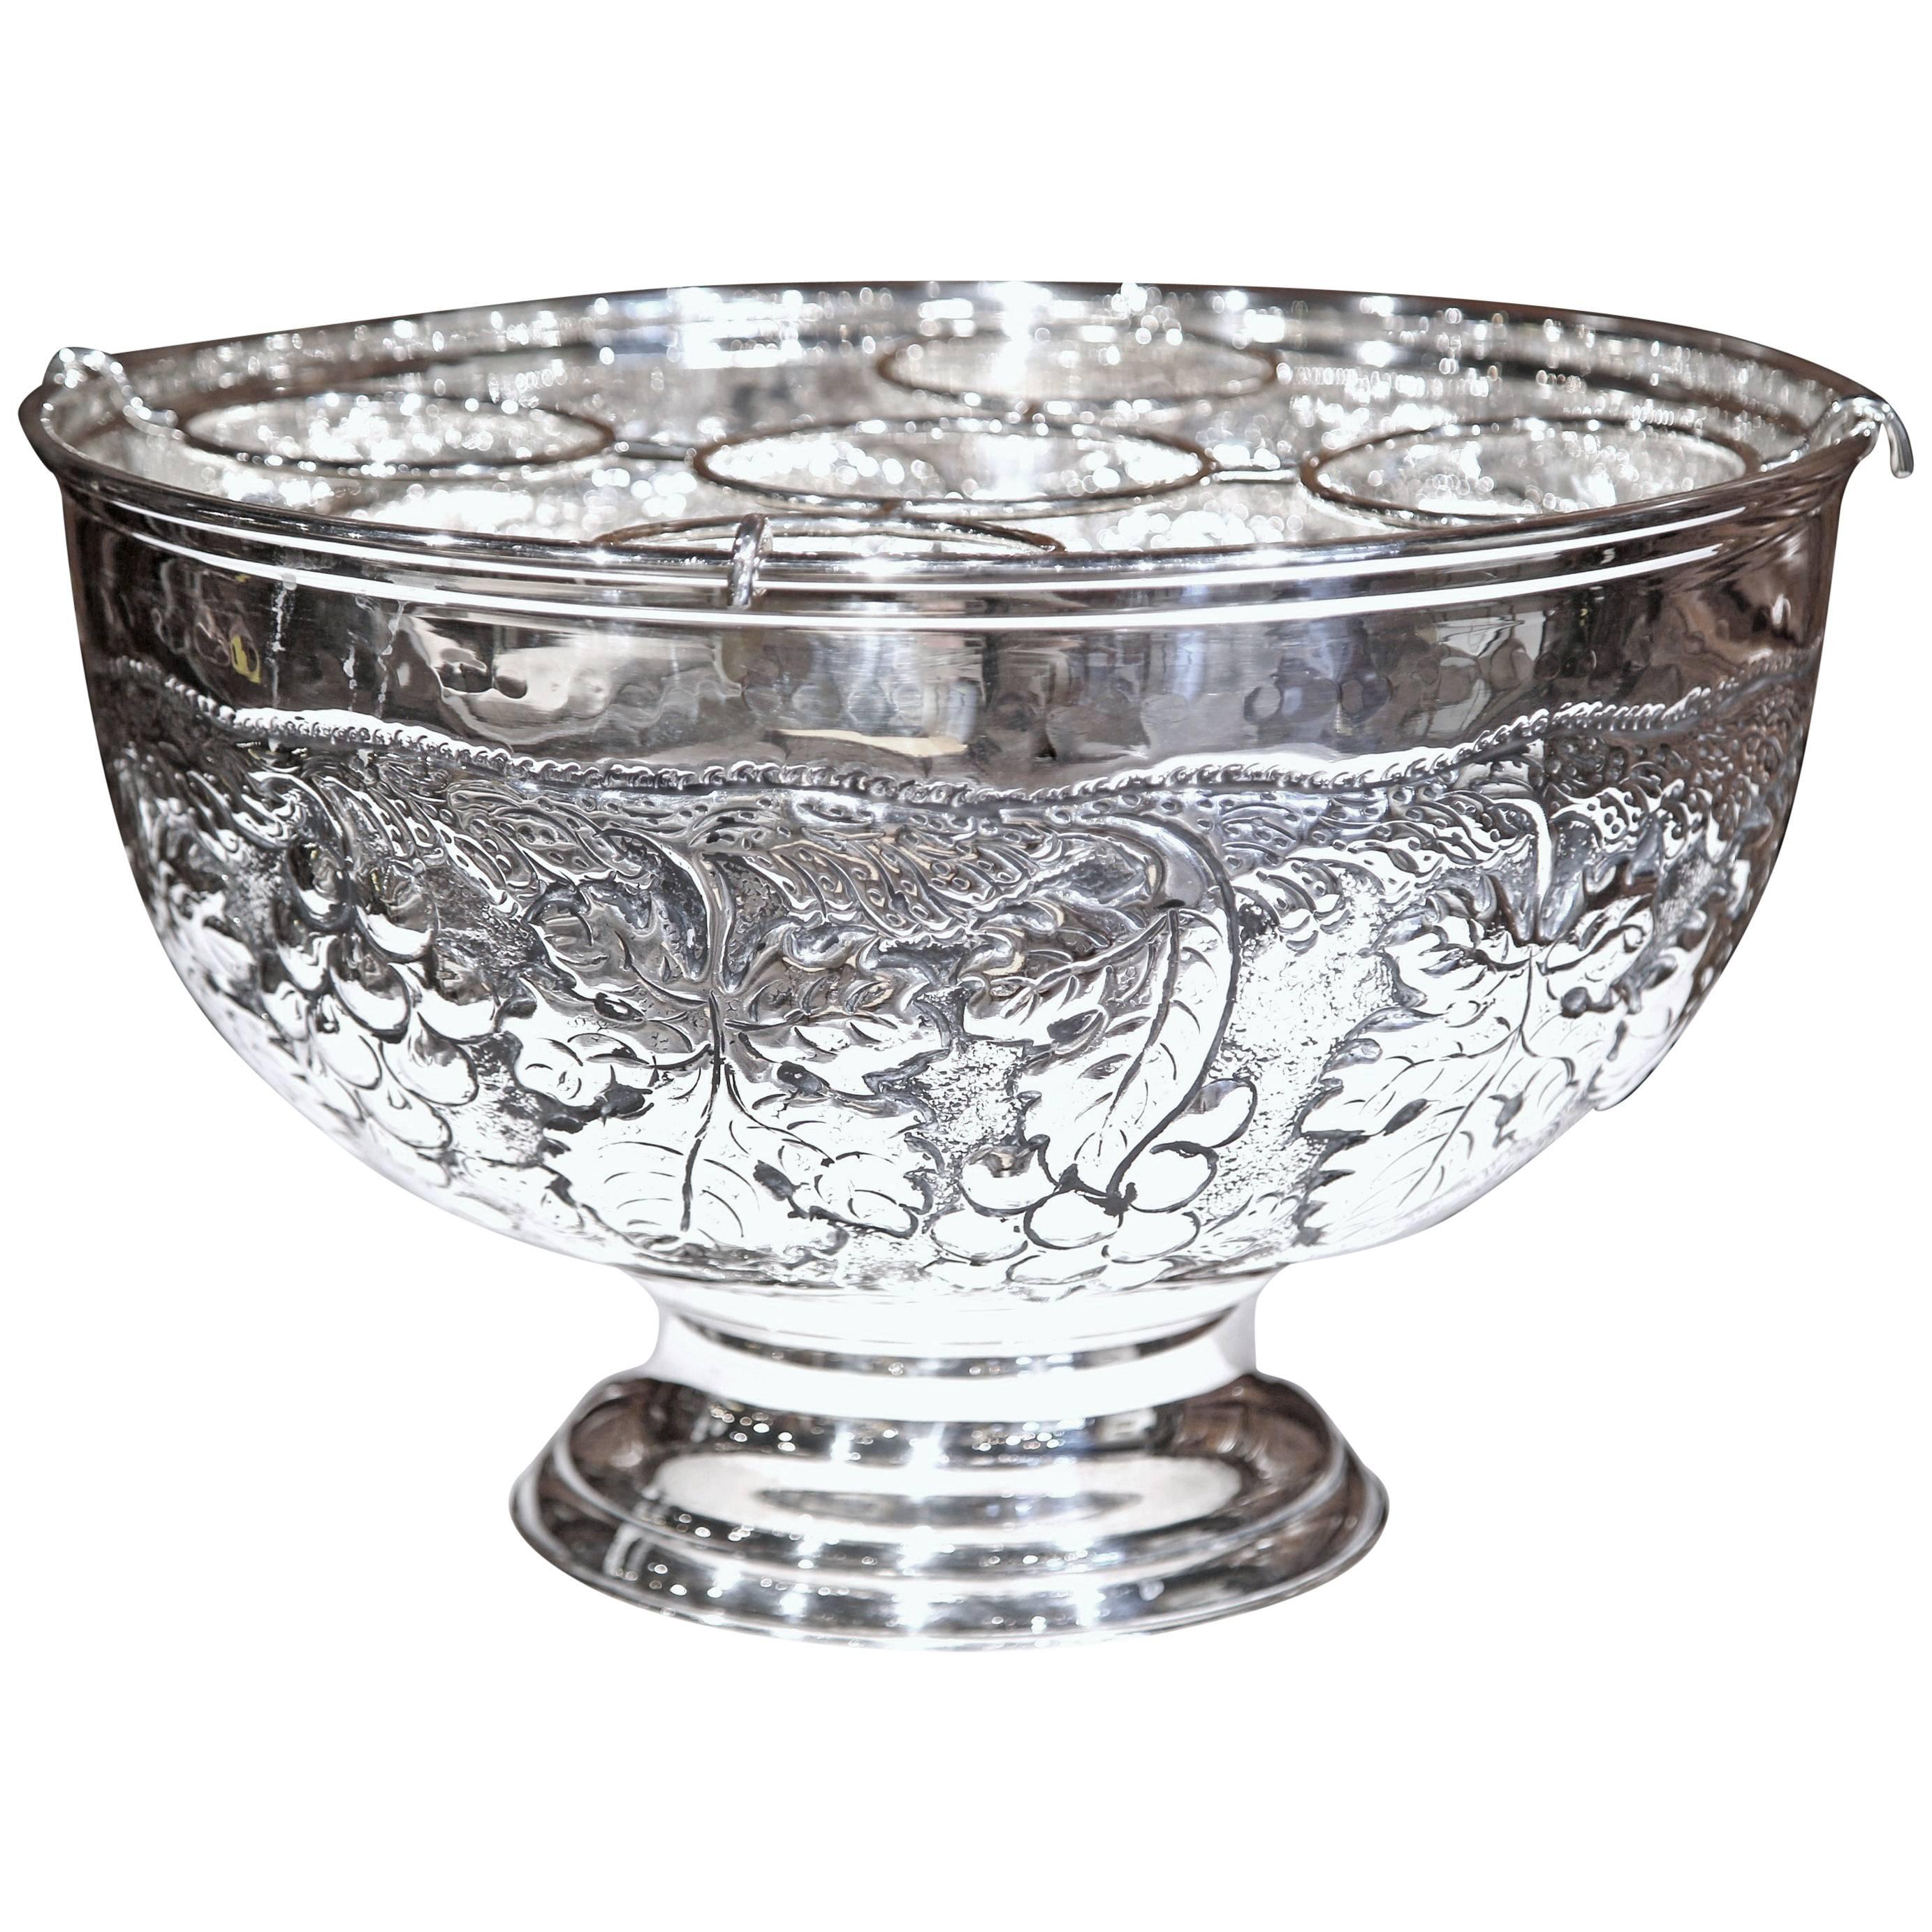 Large French Silver Plated Repousse Round Champagne or Wine Cooler